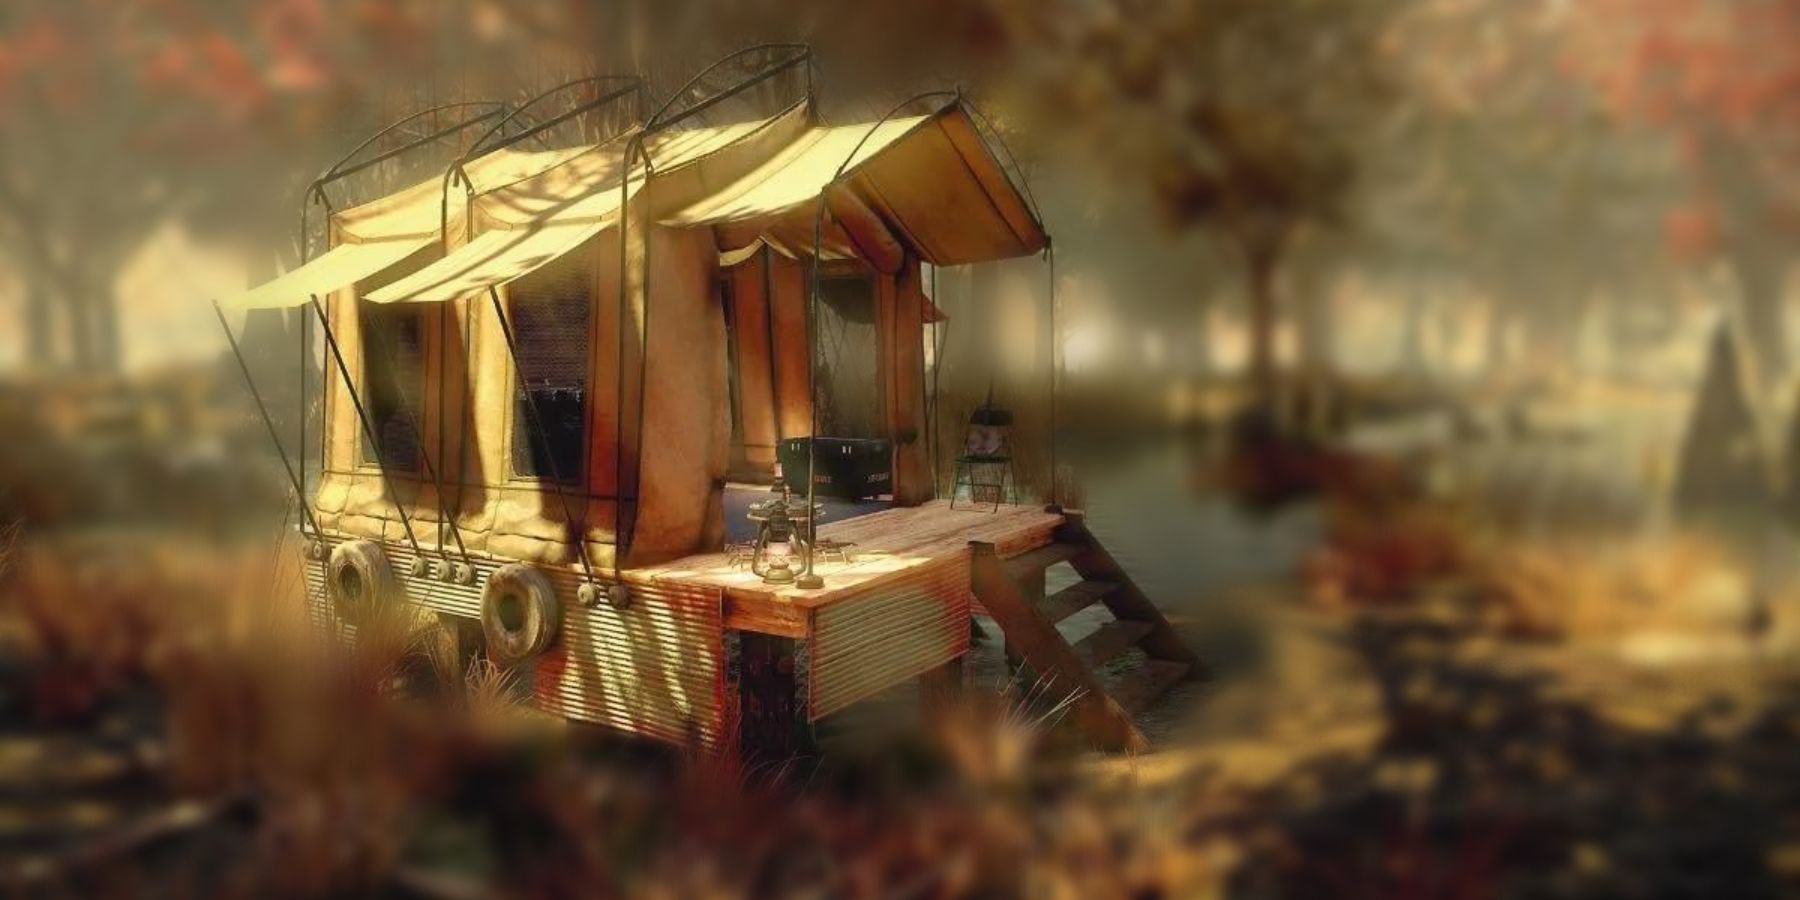 image showing a survival tent in fallout 76. 